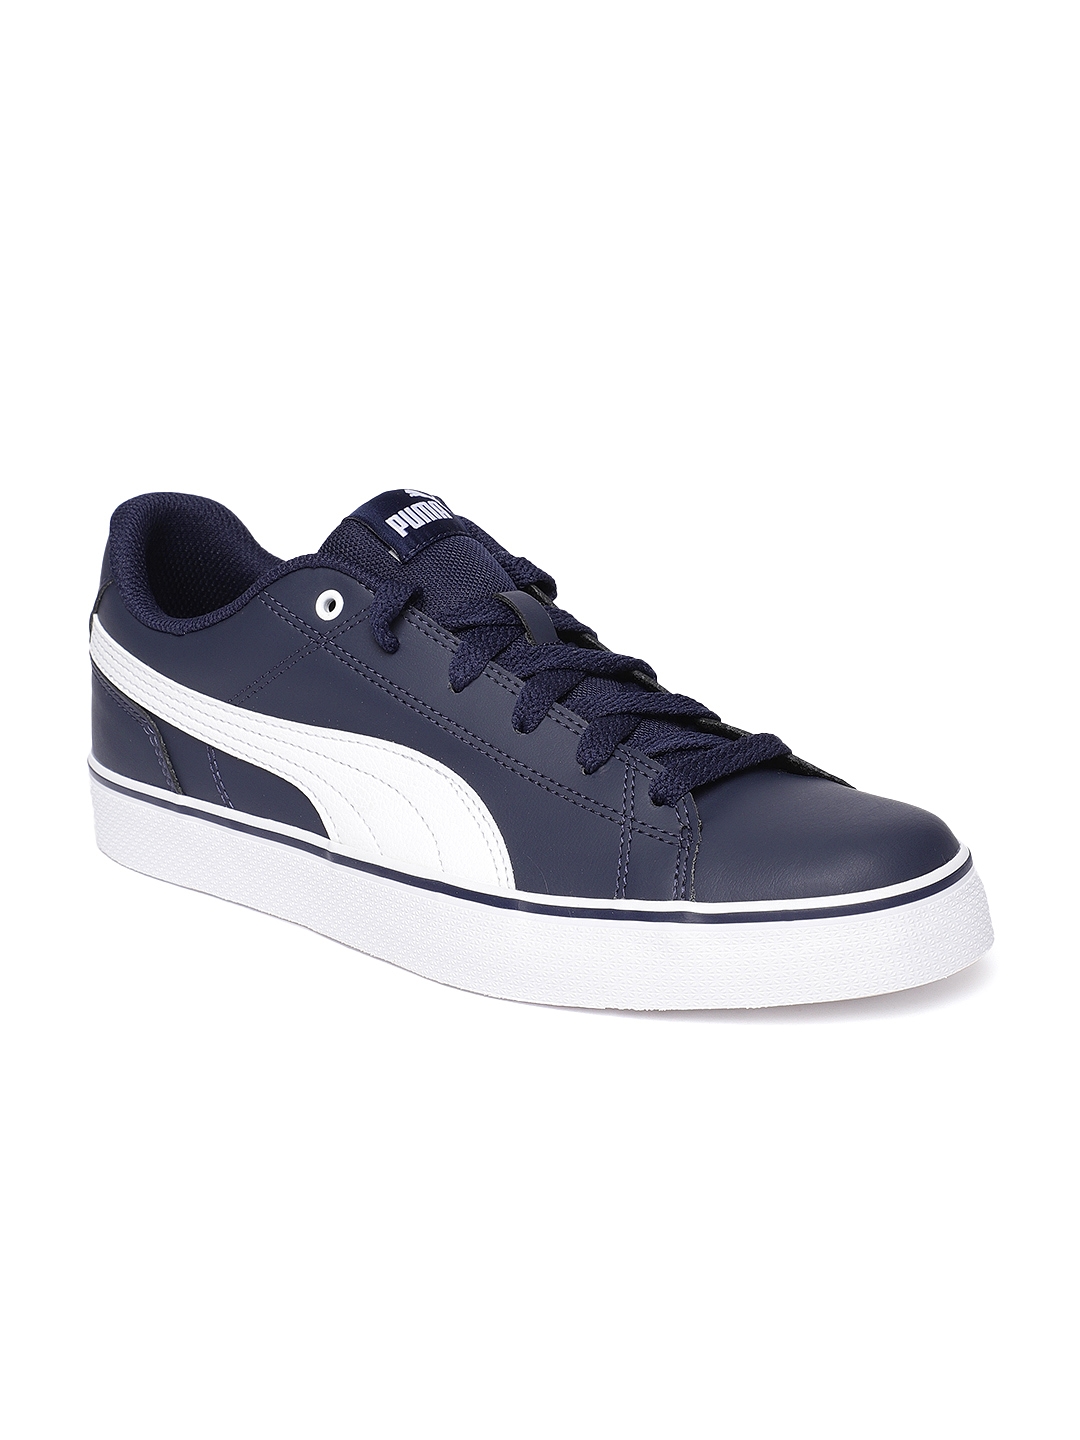 puma court point vulc navy blue sneakers